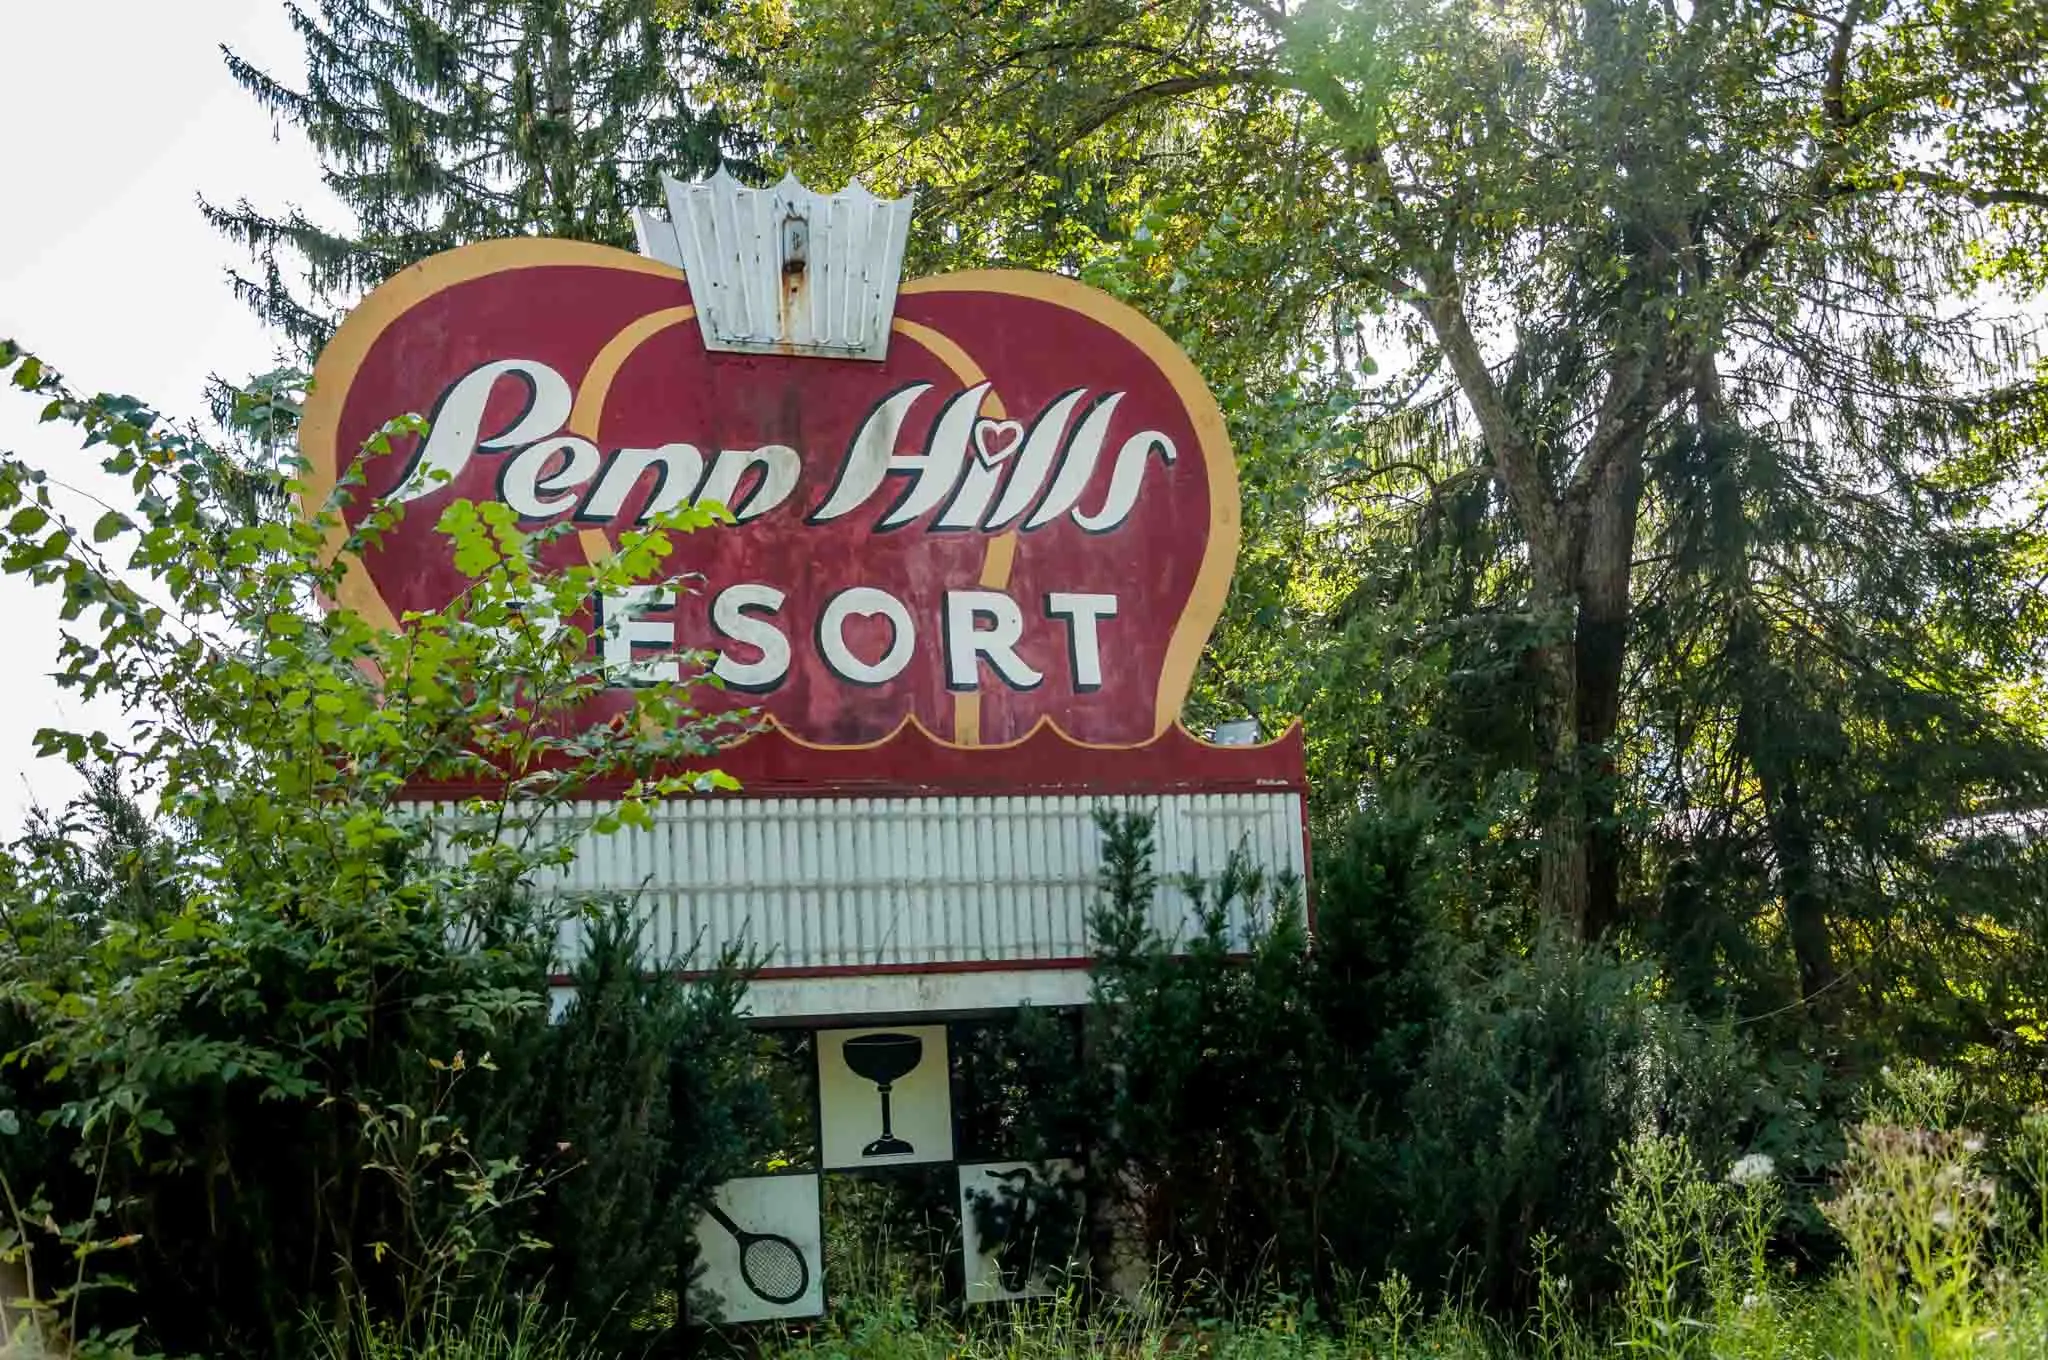 Sign for the abandoned Penn Hills Resort in the Poconos